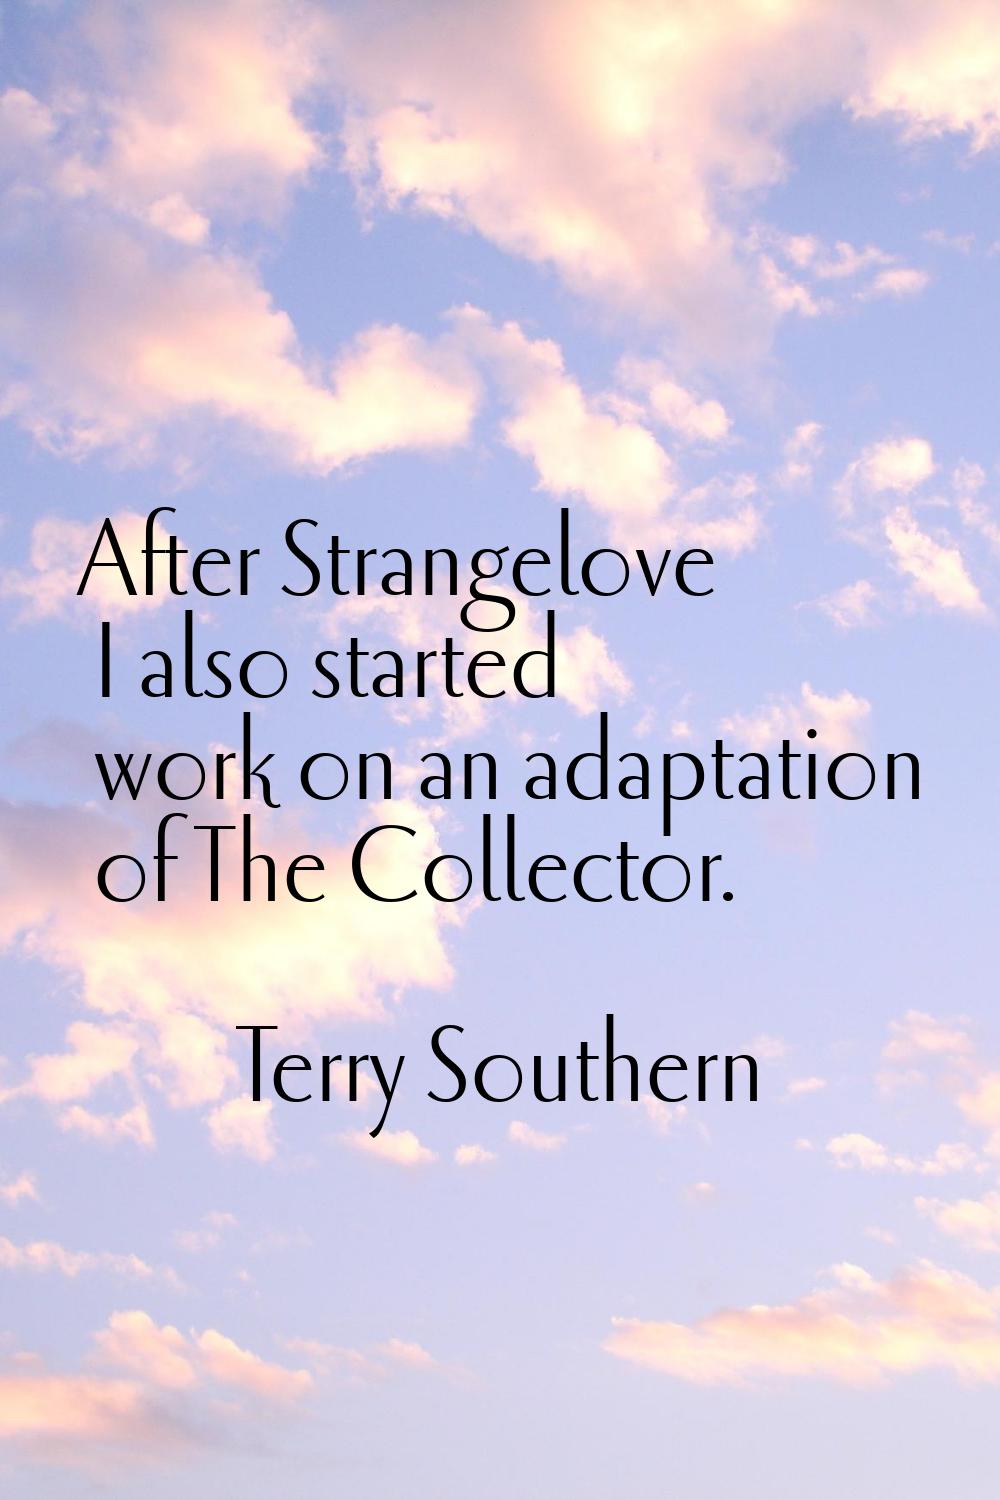 After Strangelove I also started work on an adaptation of The Collector.